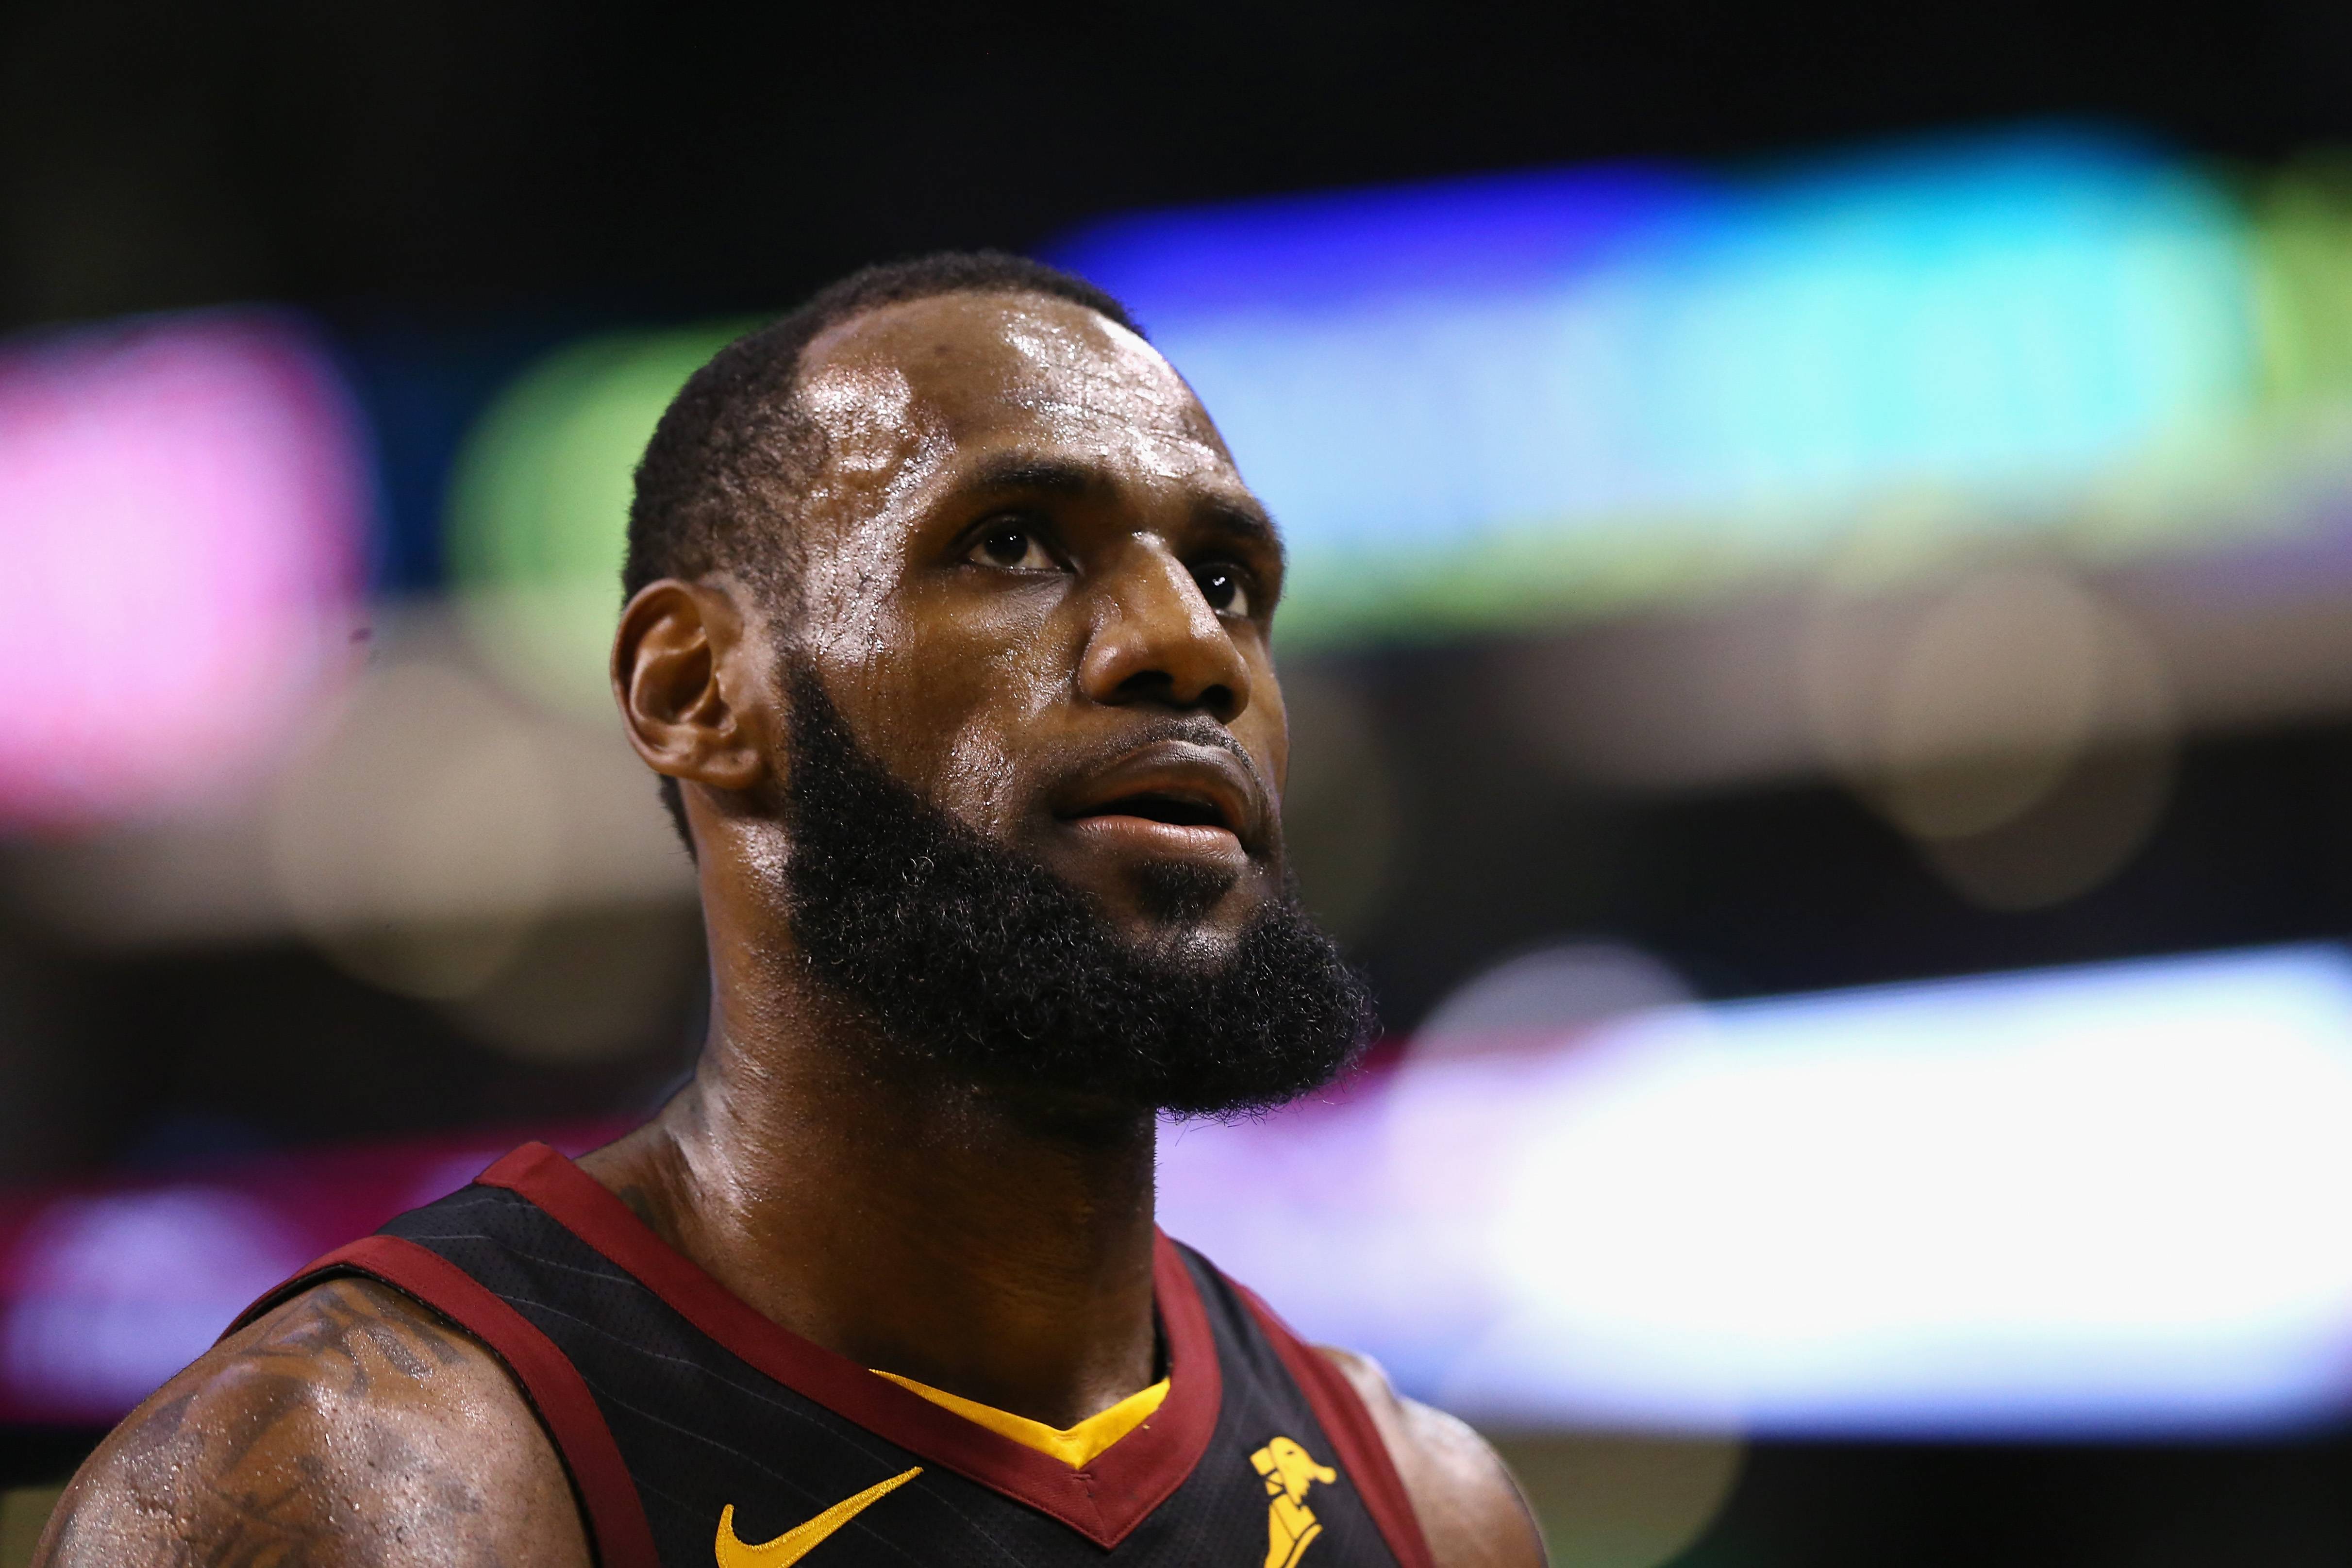 LeBron James is officially taking his talent to Los Angeles.